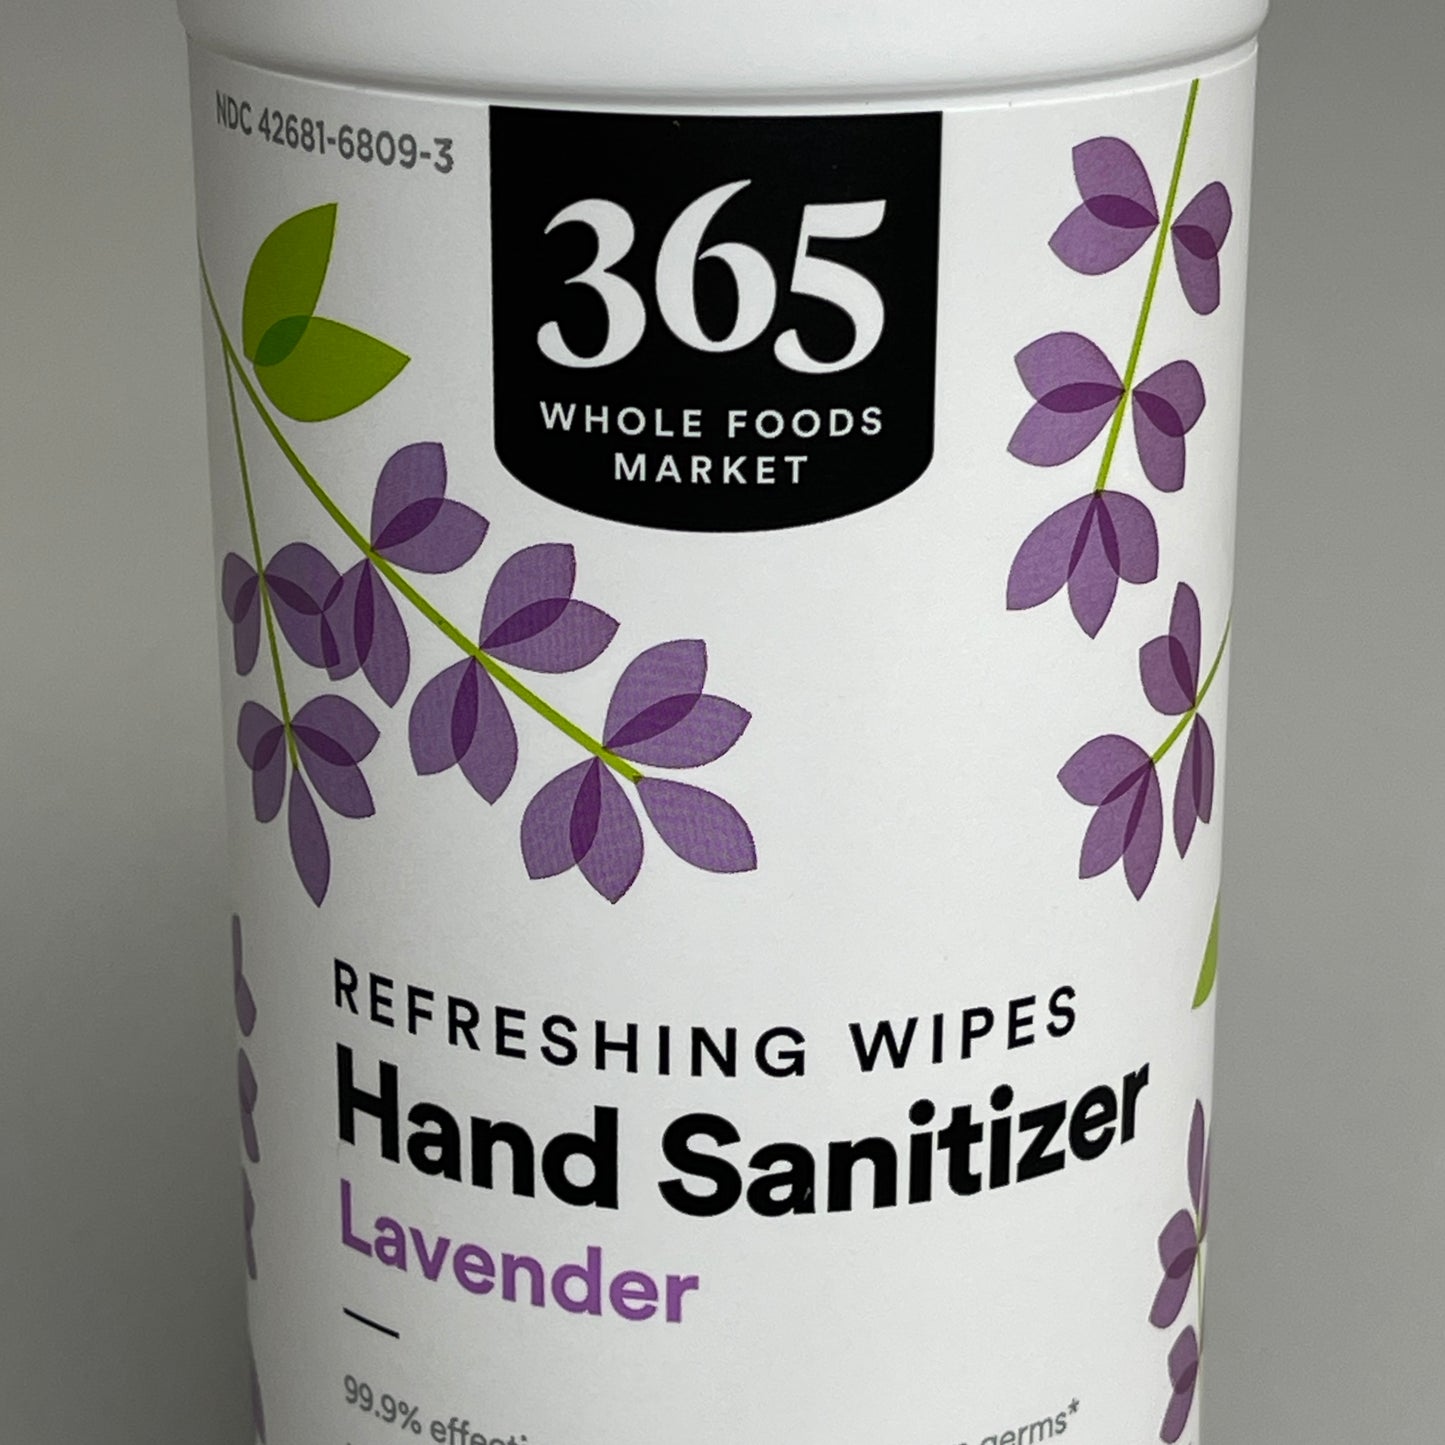 365 WHOLE FOODS MARKET (12 PACK) Refreshing Hand Sanitizer Wipes Lavender 40 Wipes (09/25)